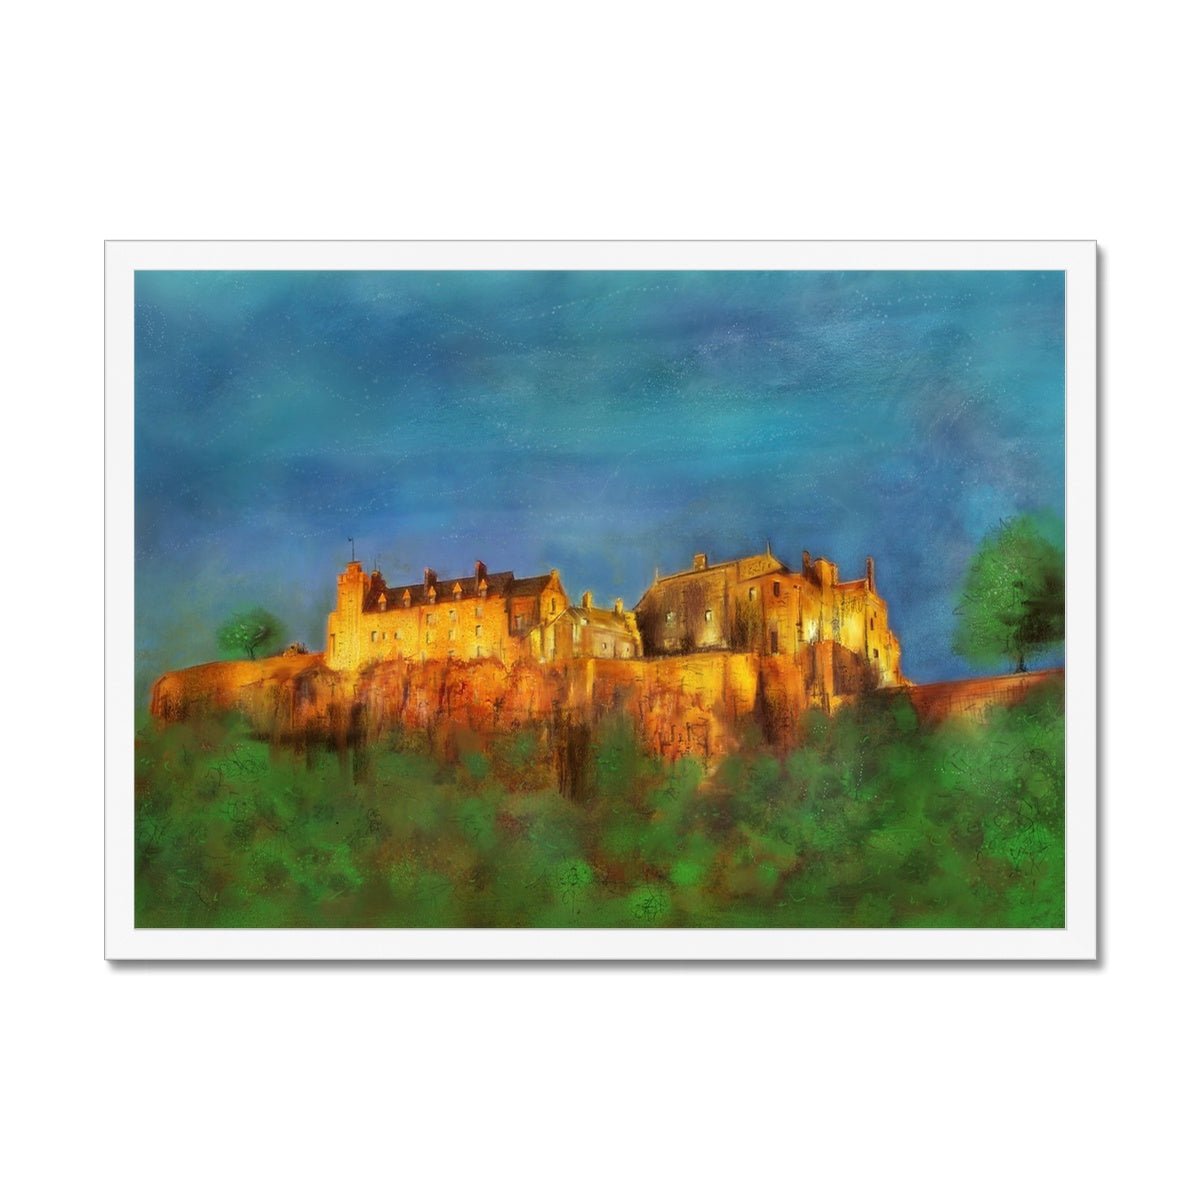 Stirling Castle Painting | Framed Prints From Scotland-Framed Prints-Historic & Iconic Scotland Art Gallery-A2 Landscape-White Frame-Paintings, Prints, Homeware, Art Gifts From Scotland By Scottish Artist Kevin Hunter